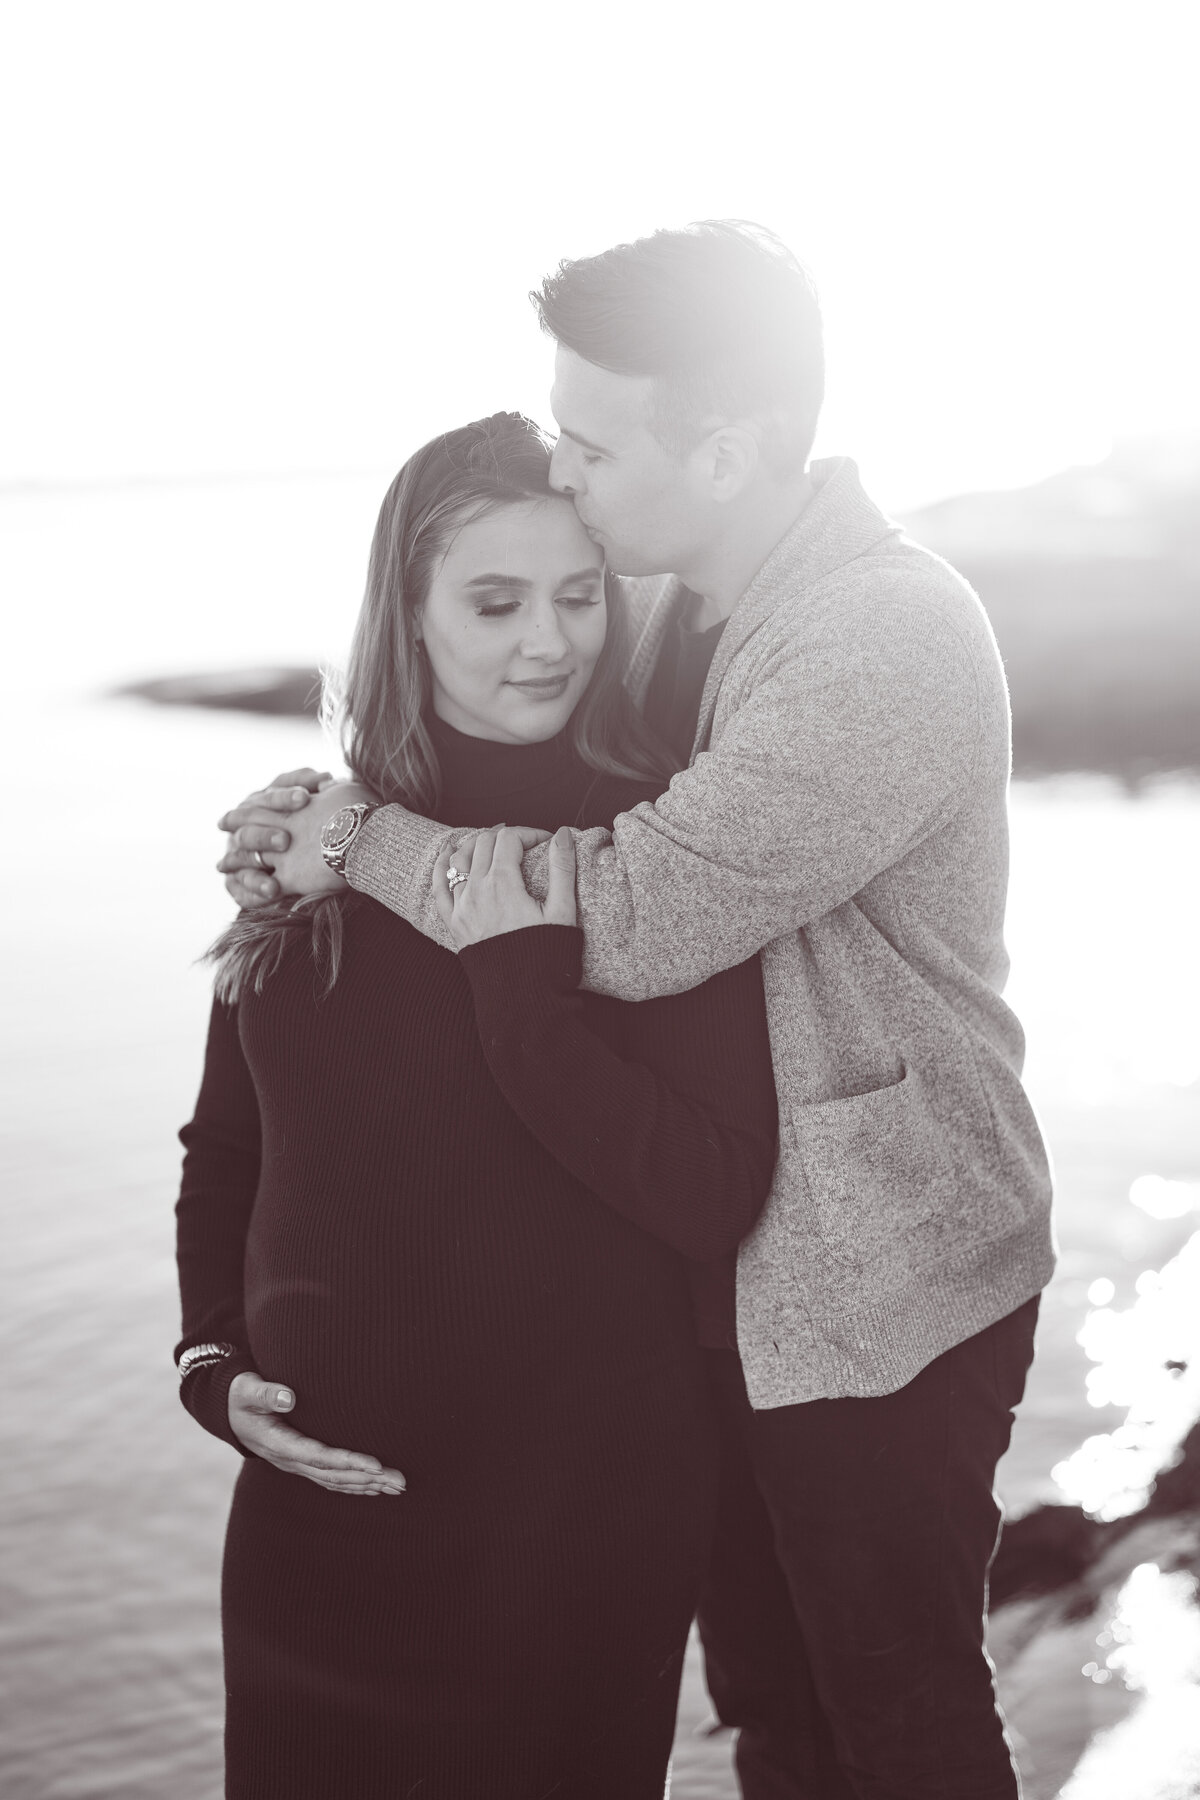 Black and white portrait of a man and a pregnant woman standing holding each other with her hands on her belly next to a lake